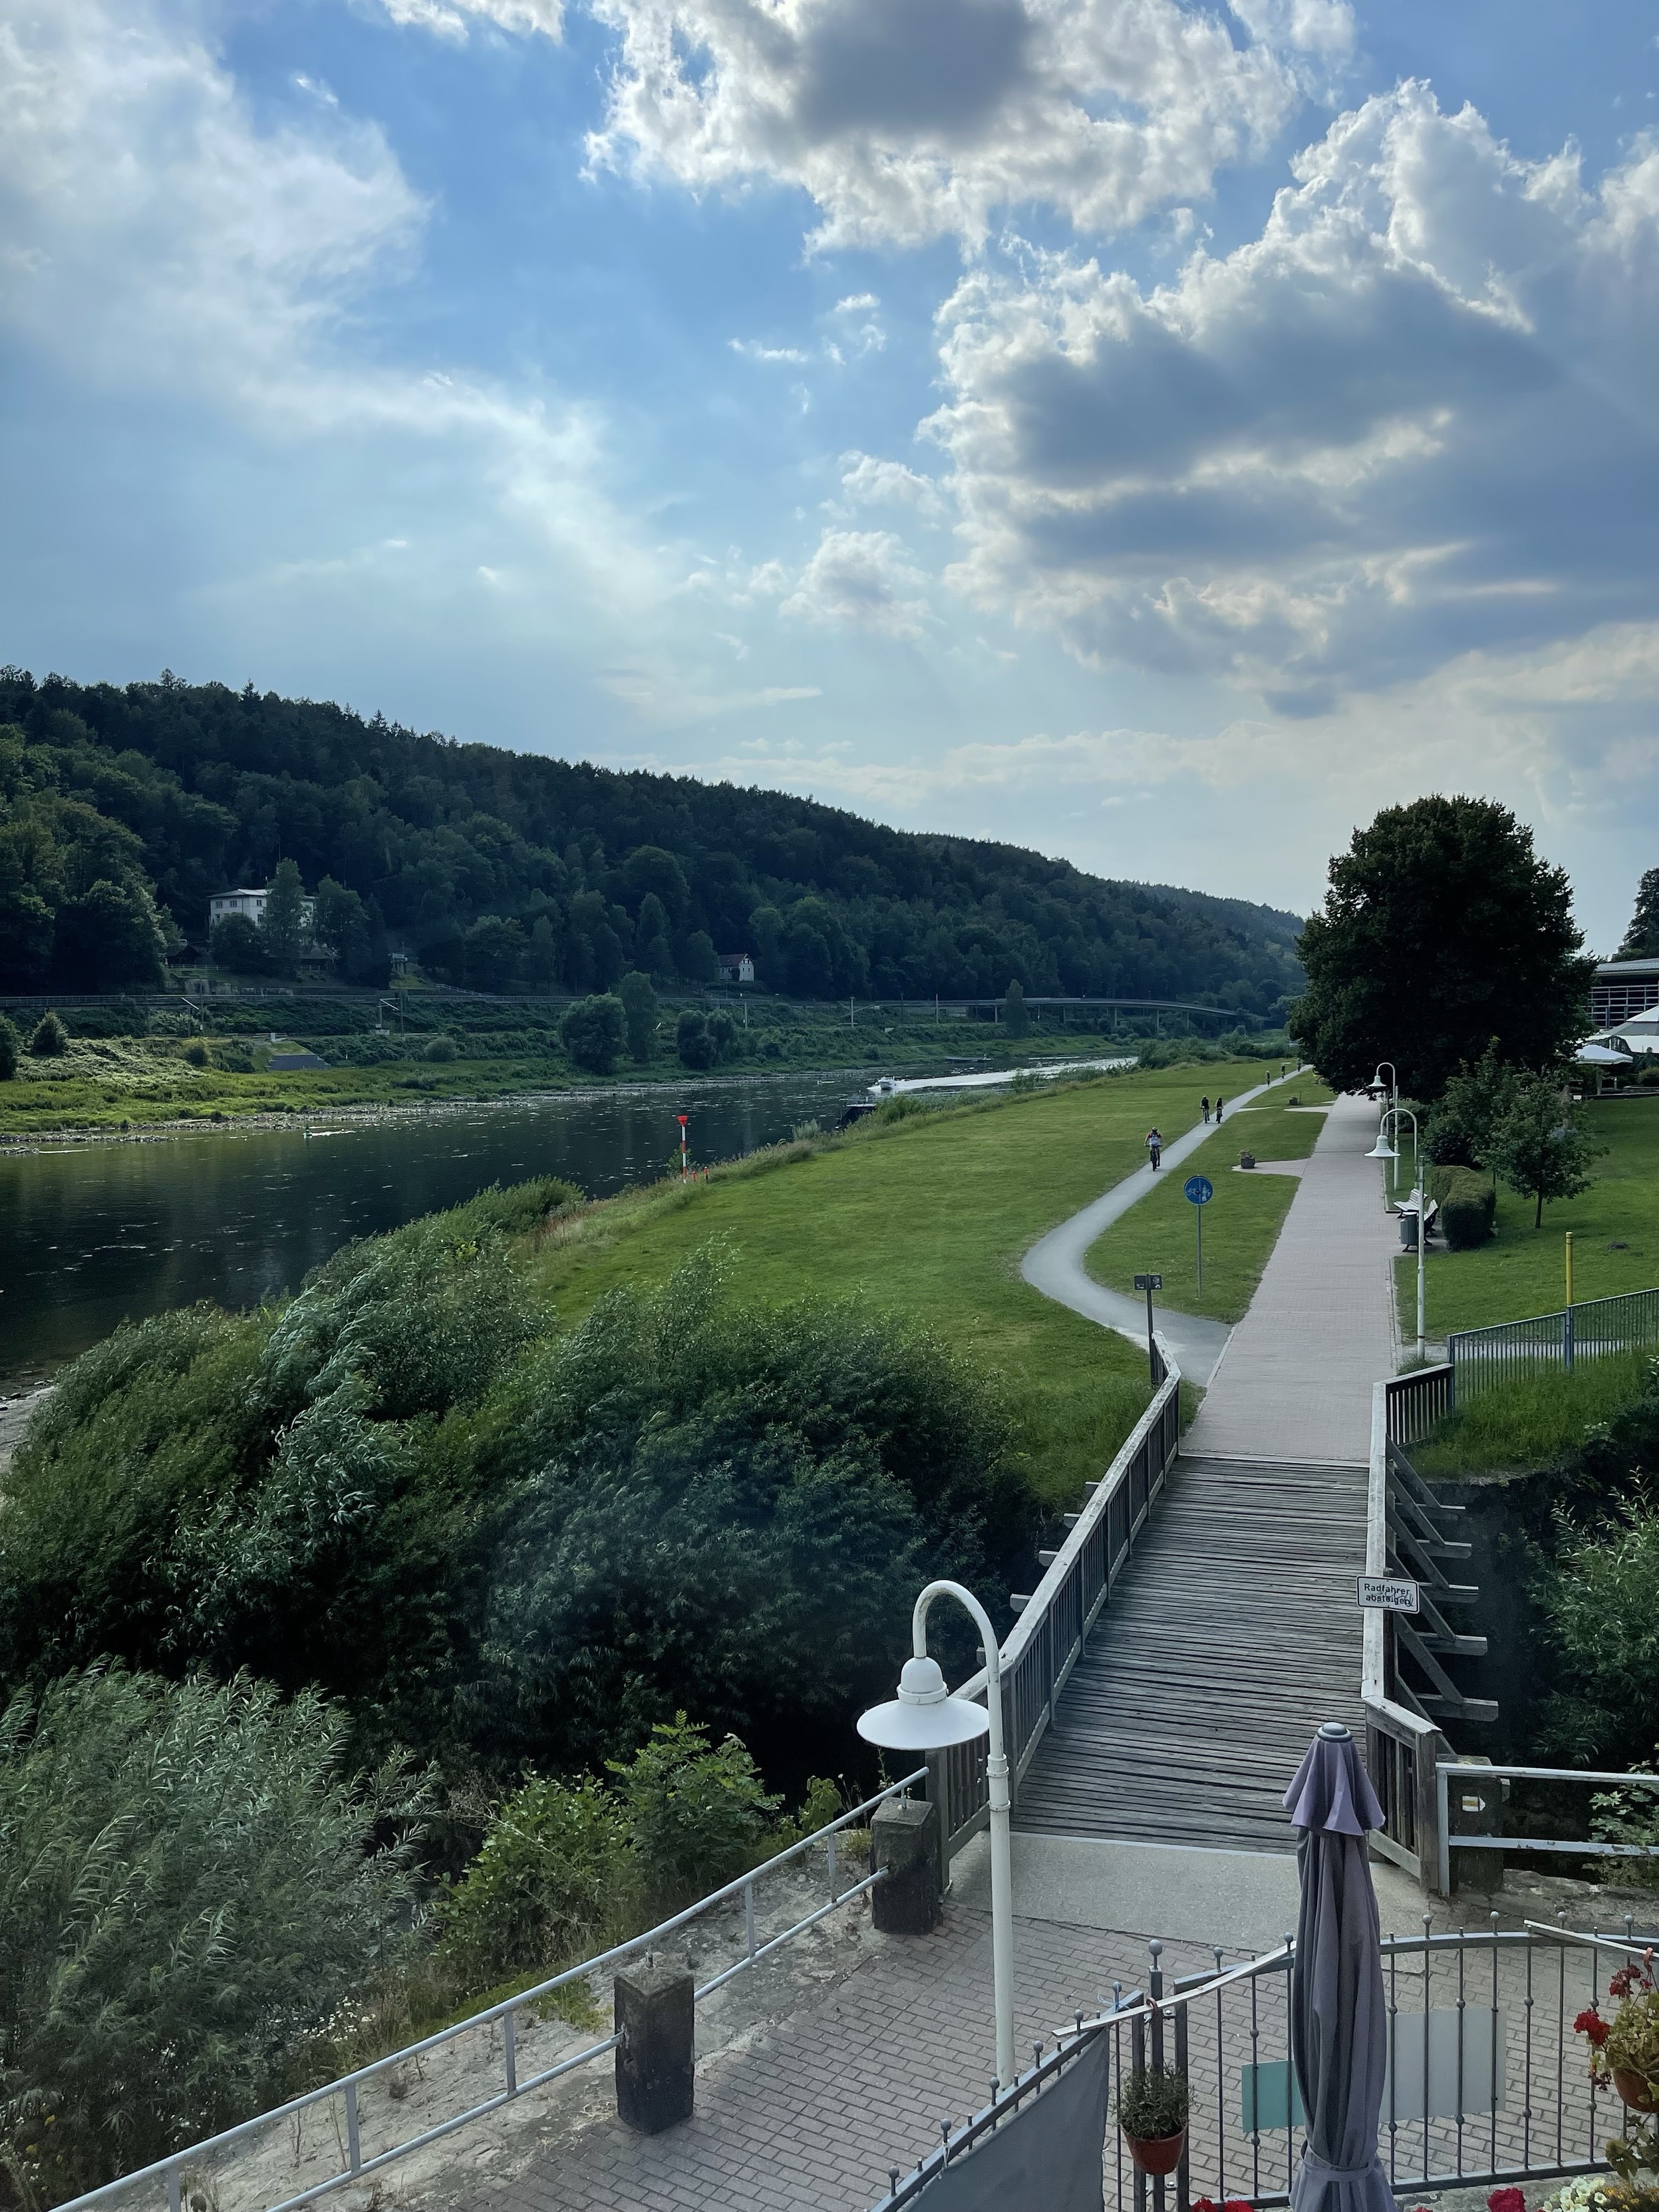 A scenic riverside pathway with greenery, a boardwalk, and a lamppost. The sky is partly cloudy with sunlight breaking through. The path follows the curve of the river, with trees and hills in the background.